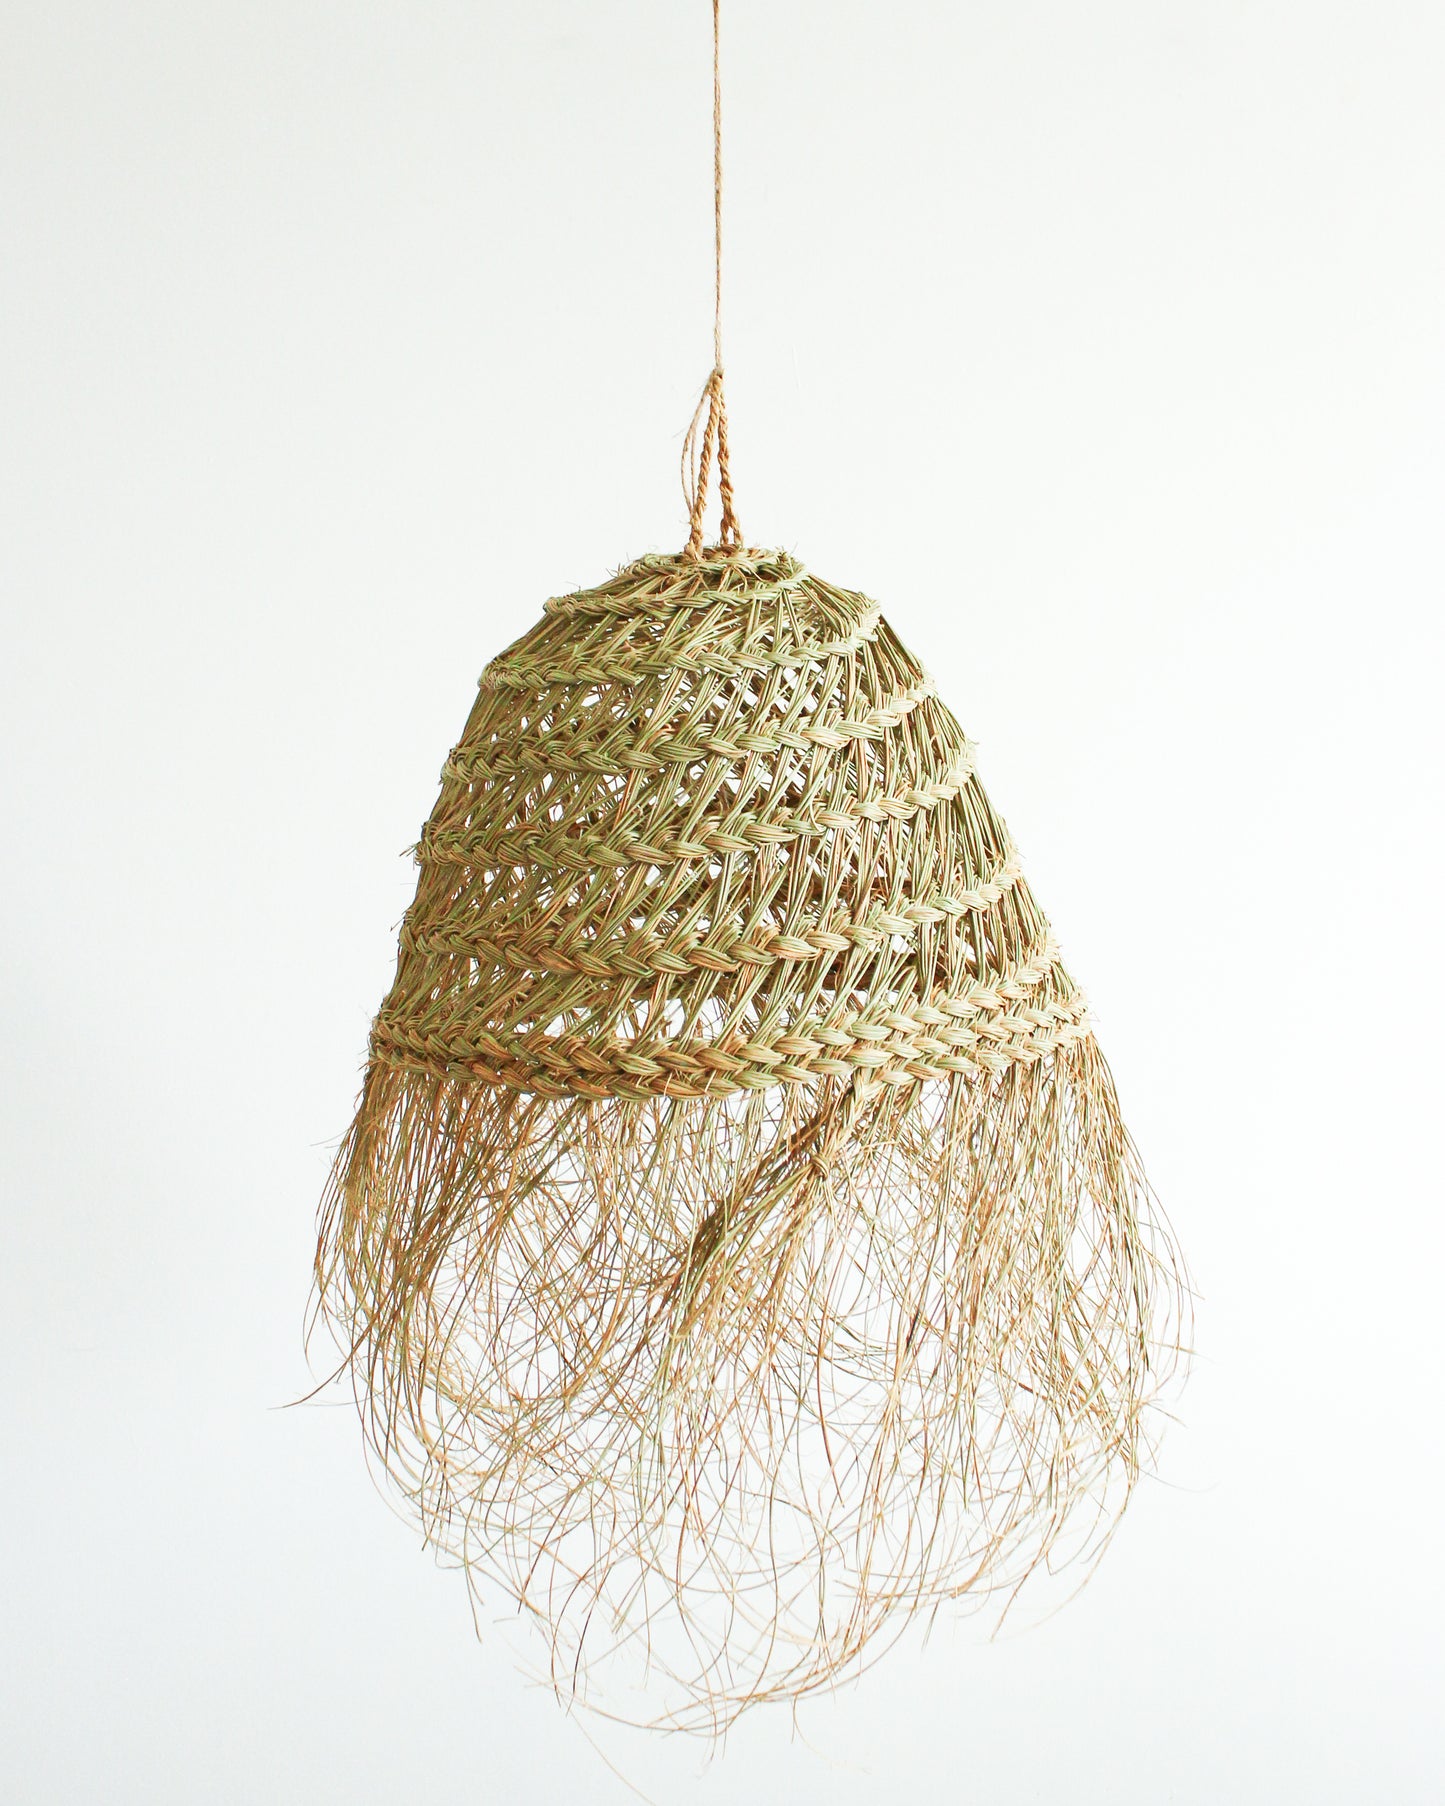 Handwoven Moroccan Lampshade with Fringes / Round // Medium